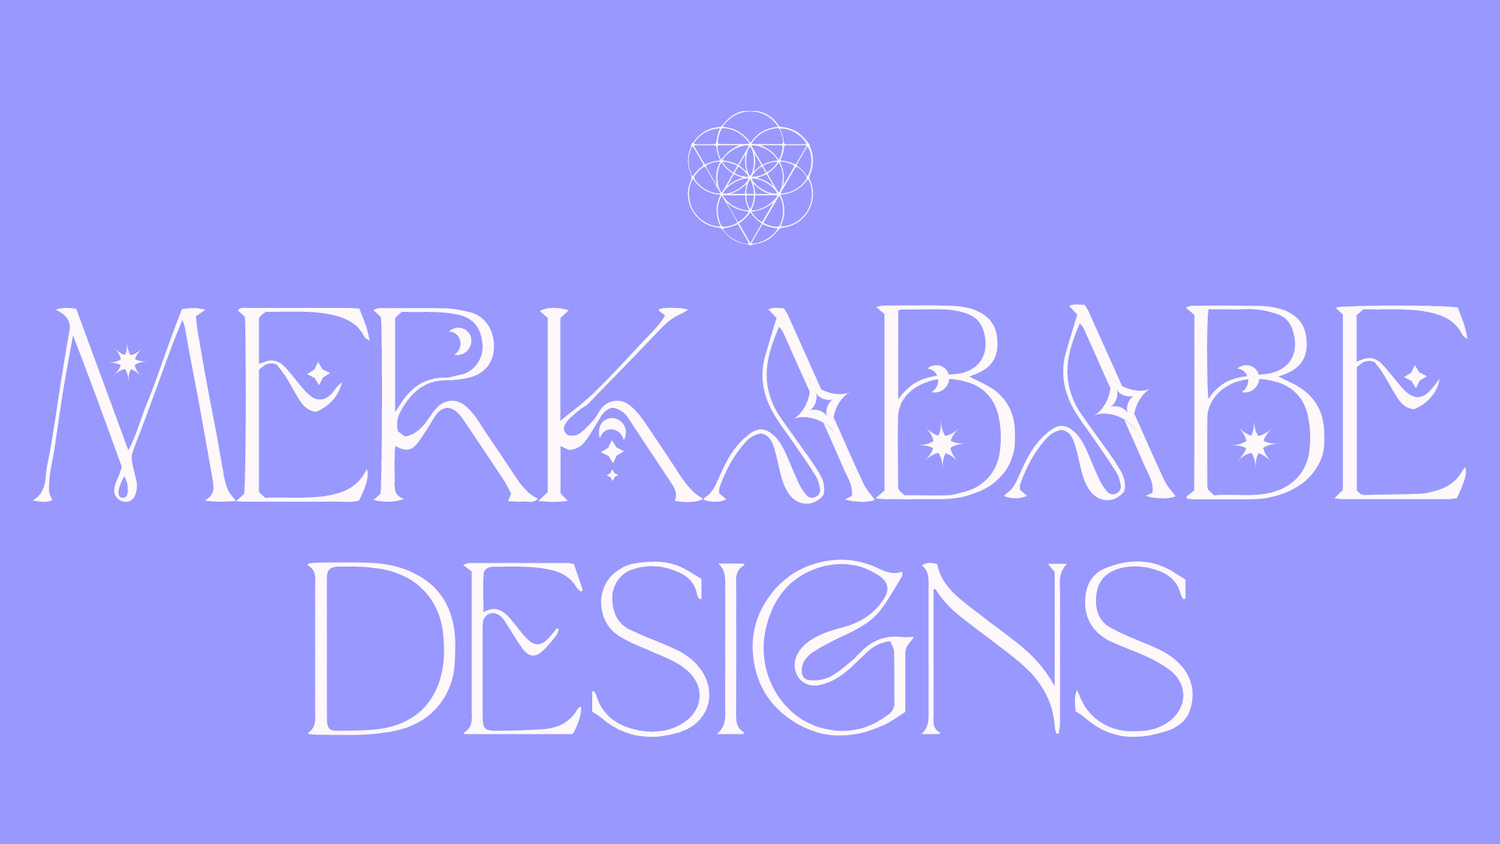 carly tway, founder of merkababe designs